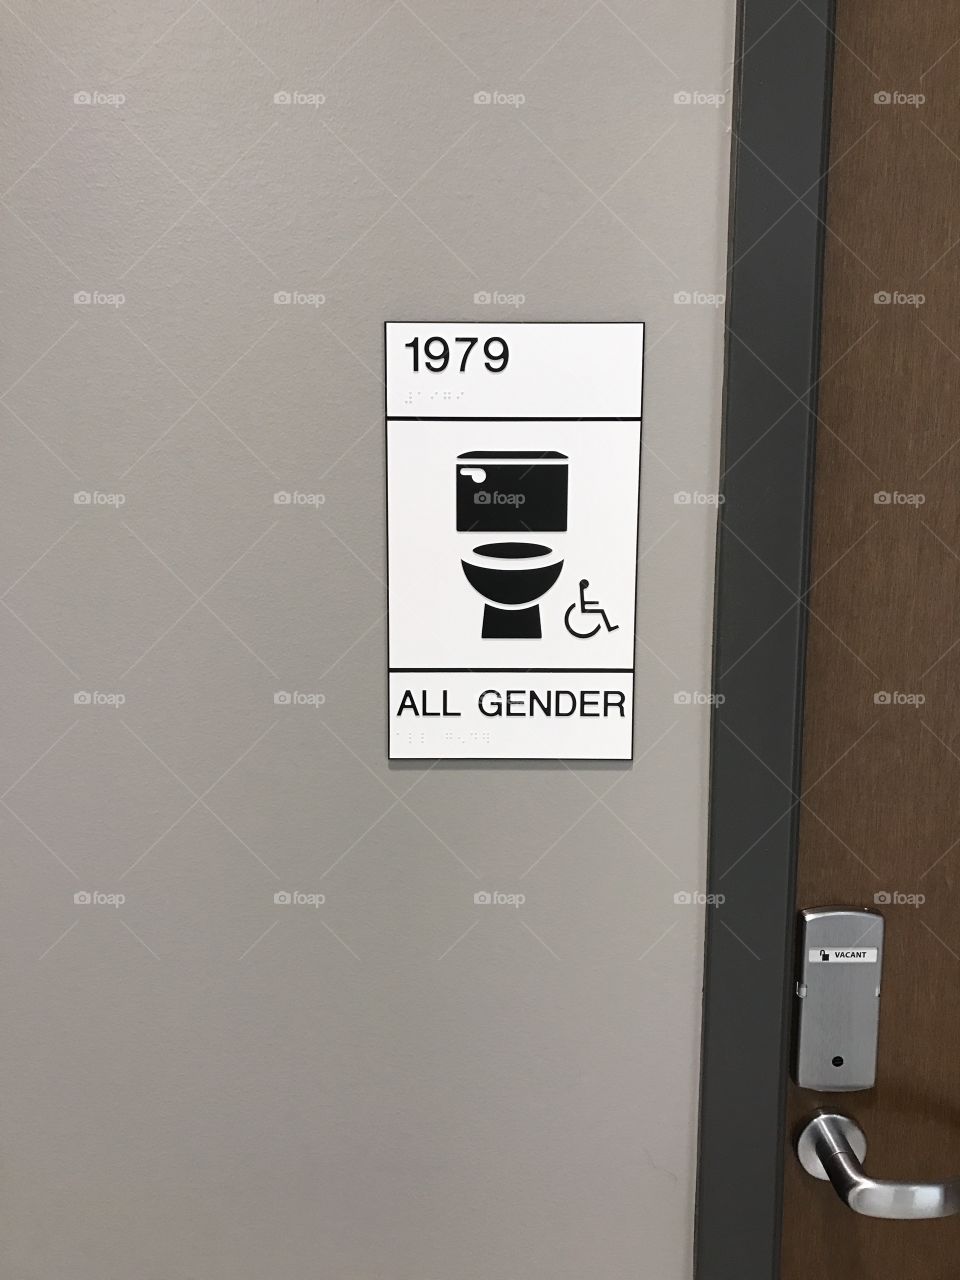 All gender bathroom sign in a building